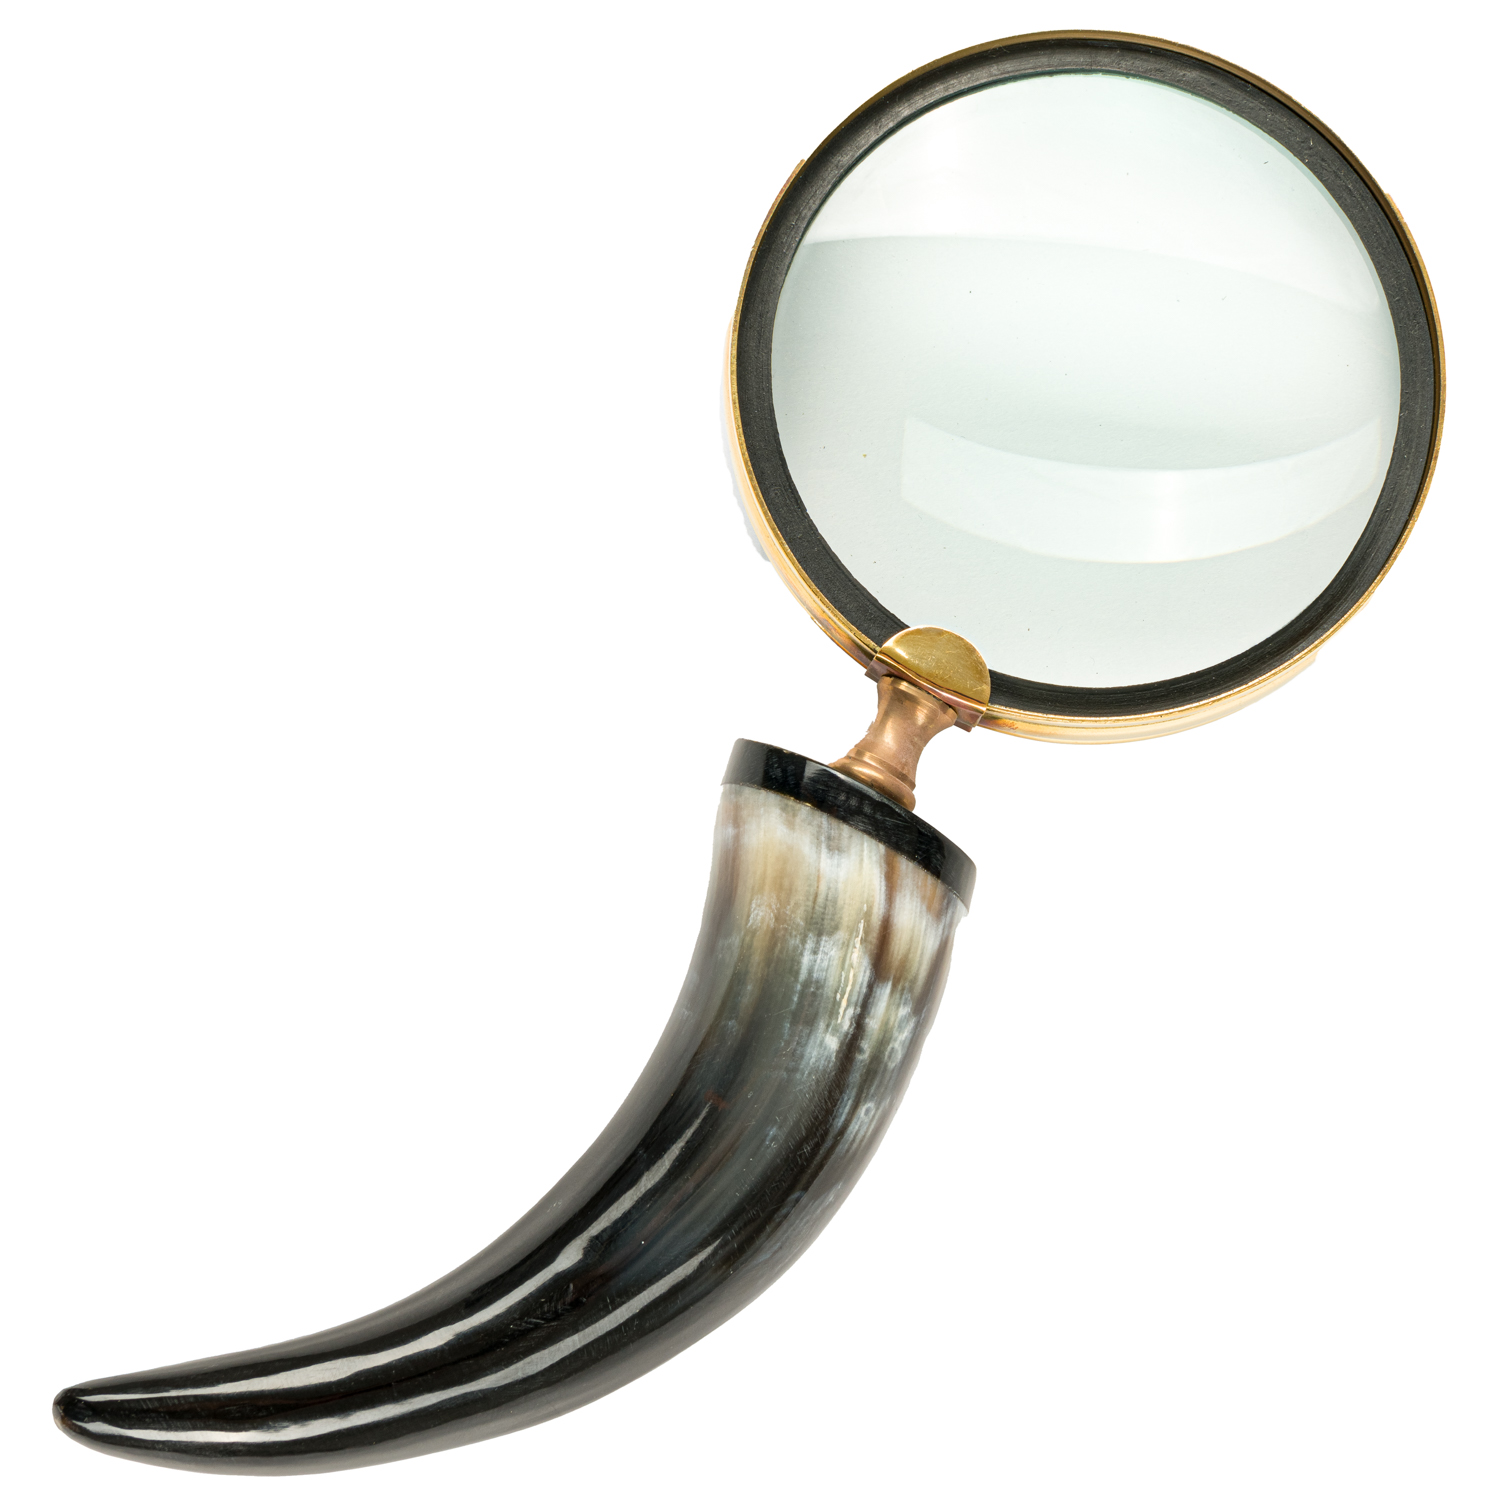 Horn And Brass Magifying Glass - Image 1